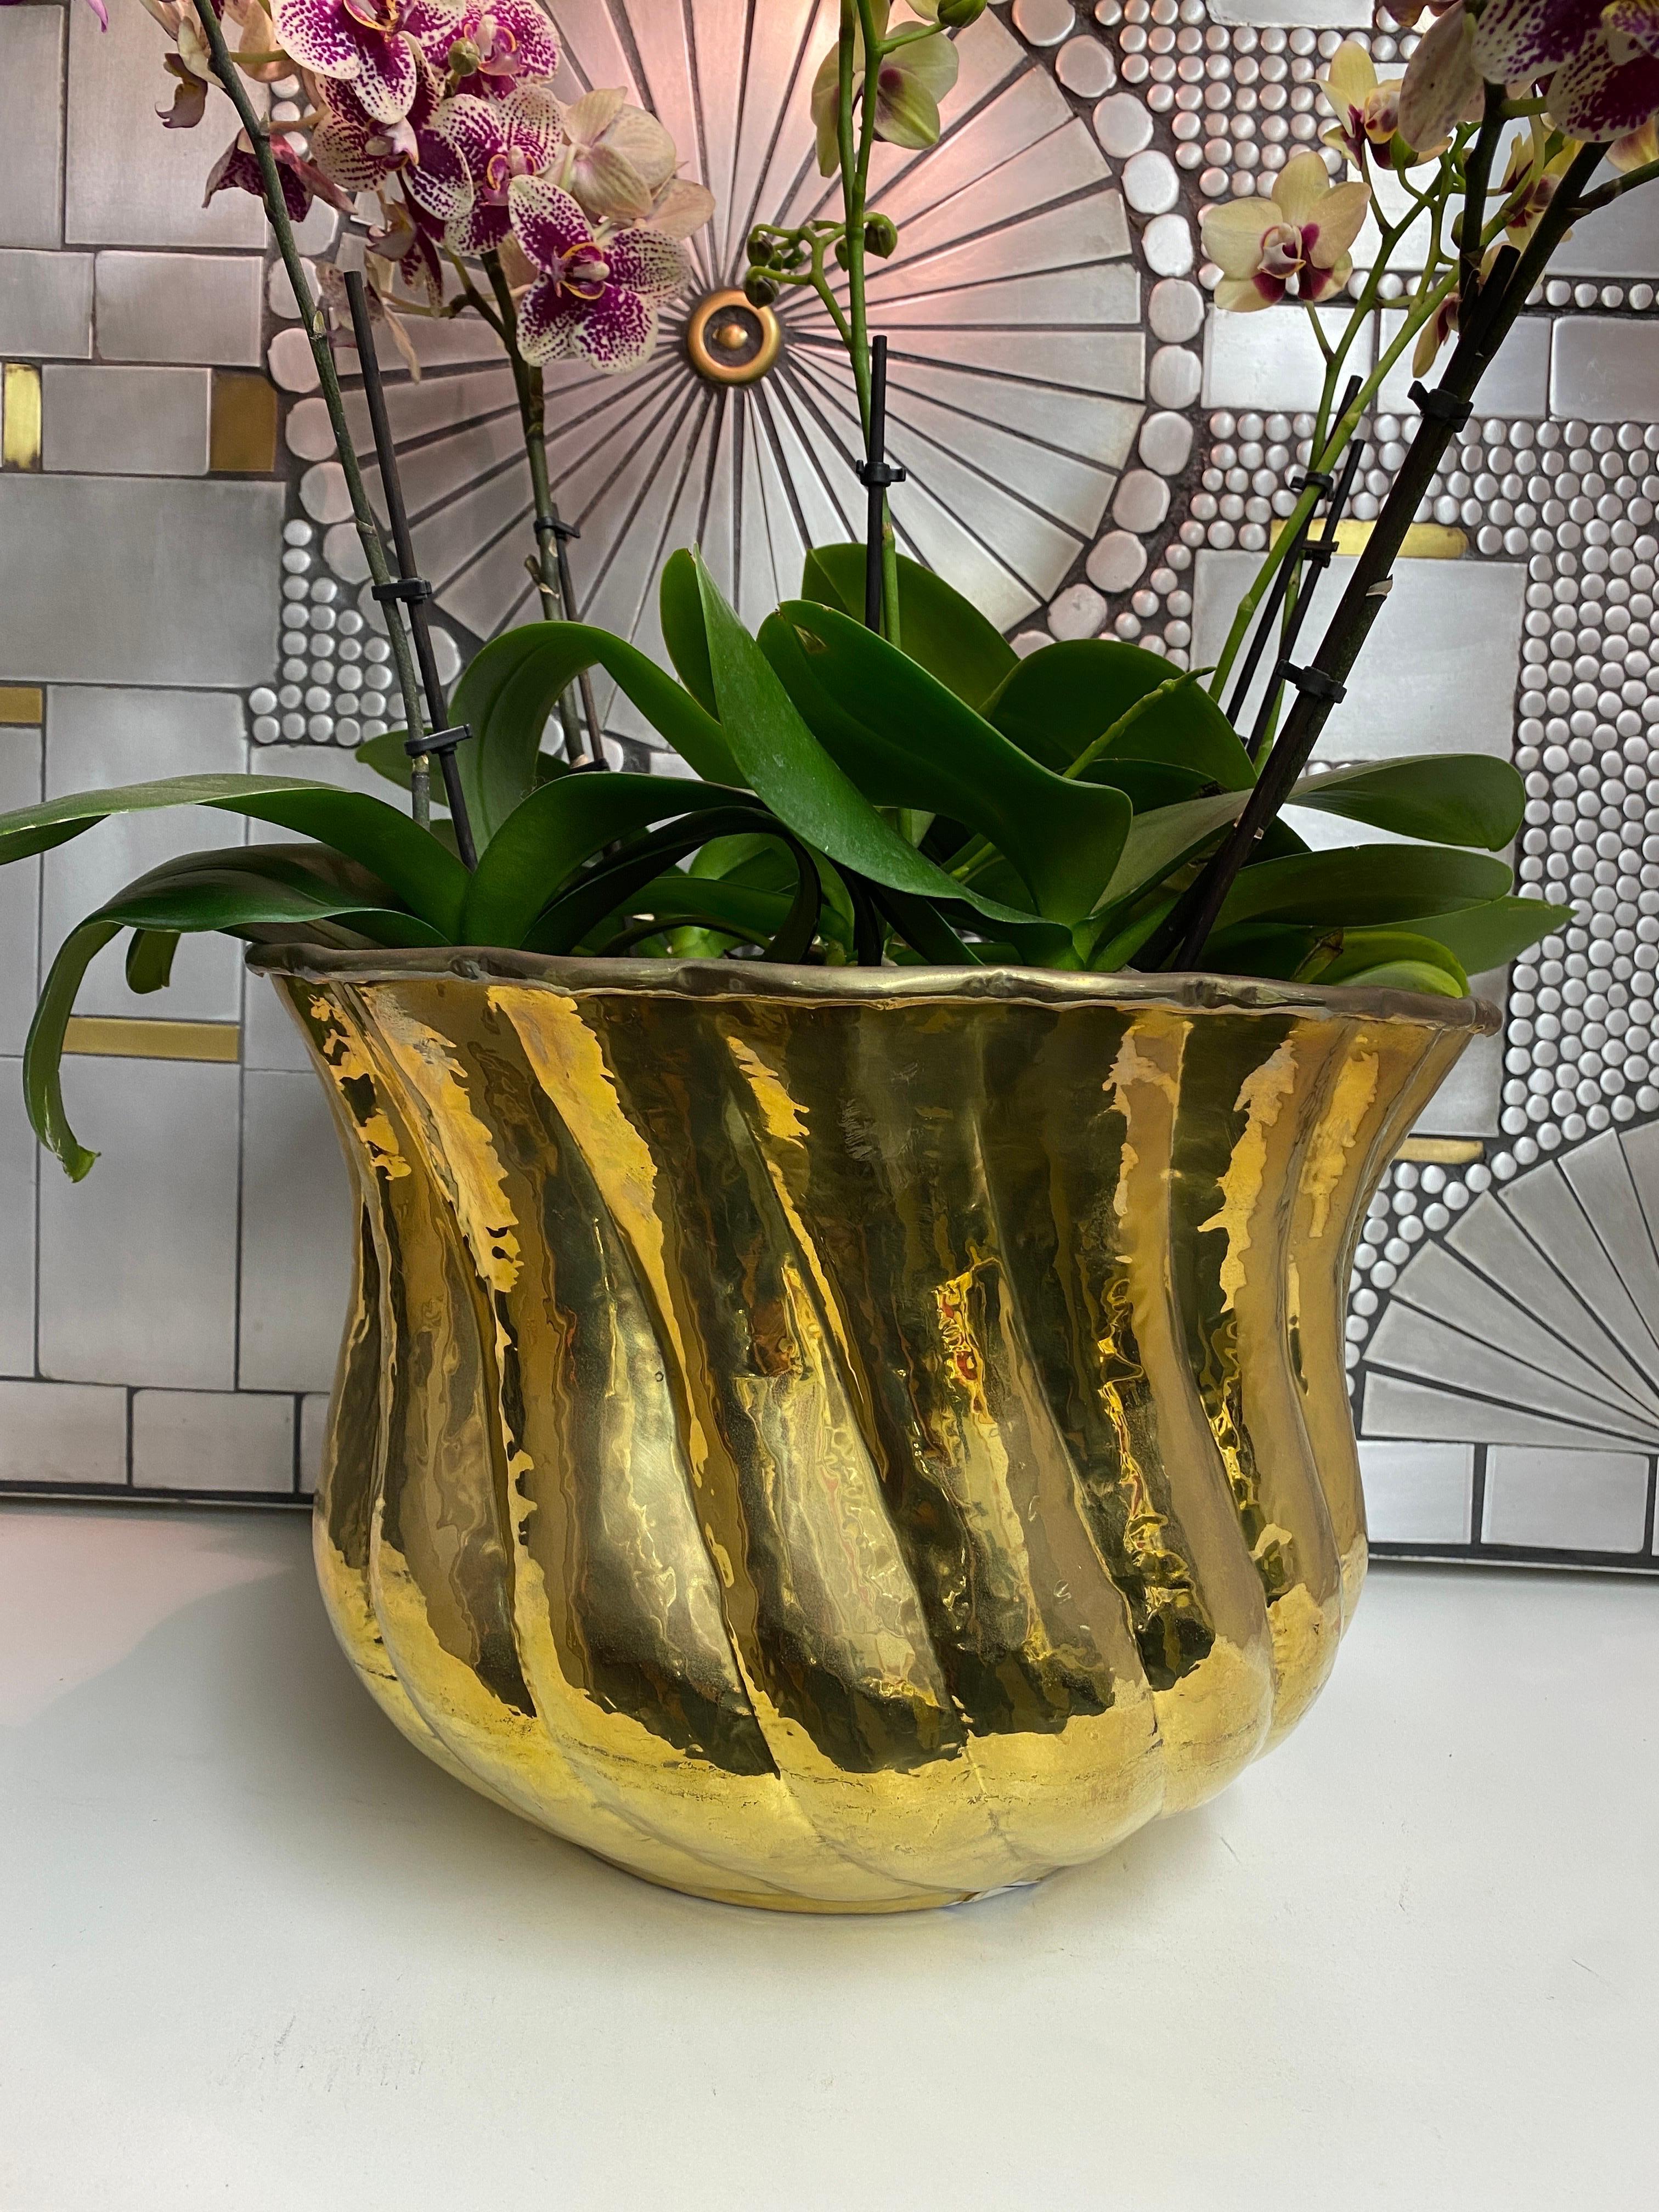 Hand hammered ribbed brass planter. Never used old inventory from 1980s. Two available. Price is per planter.